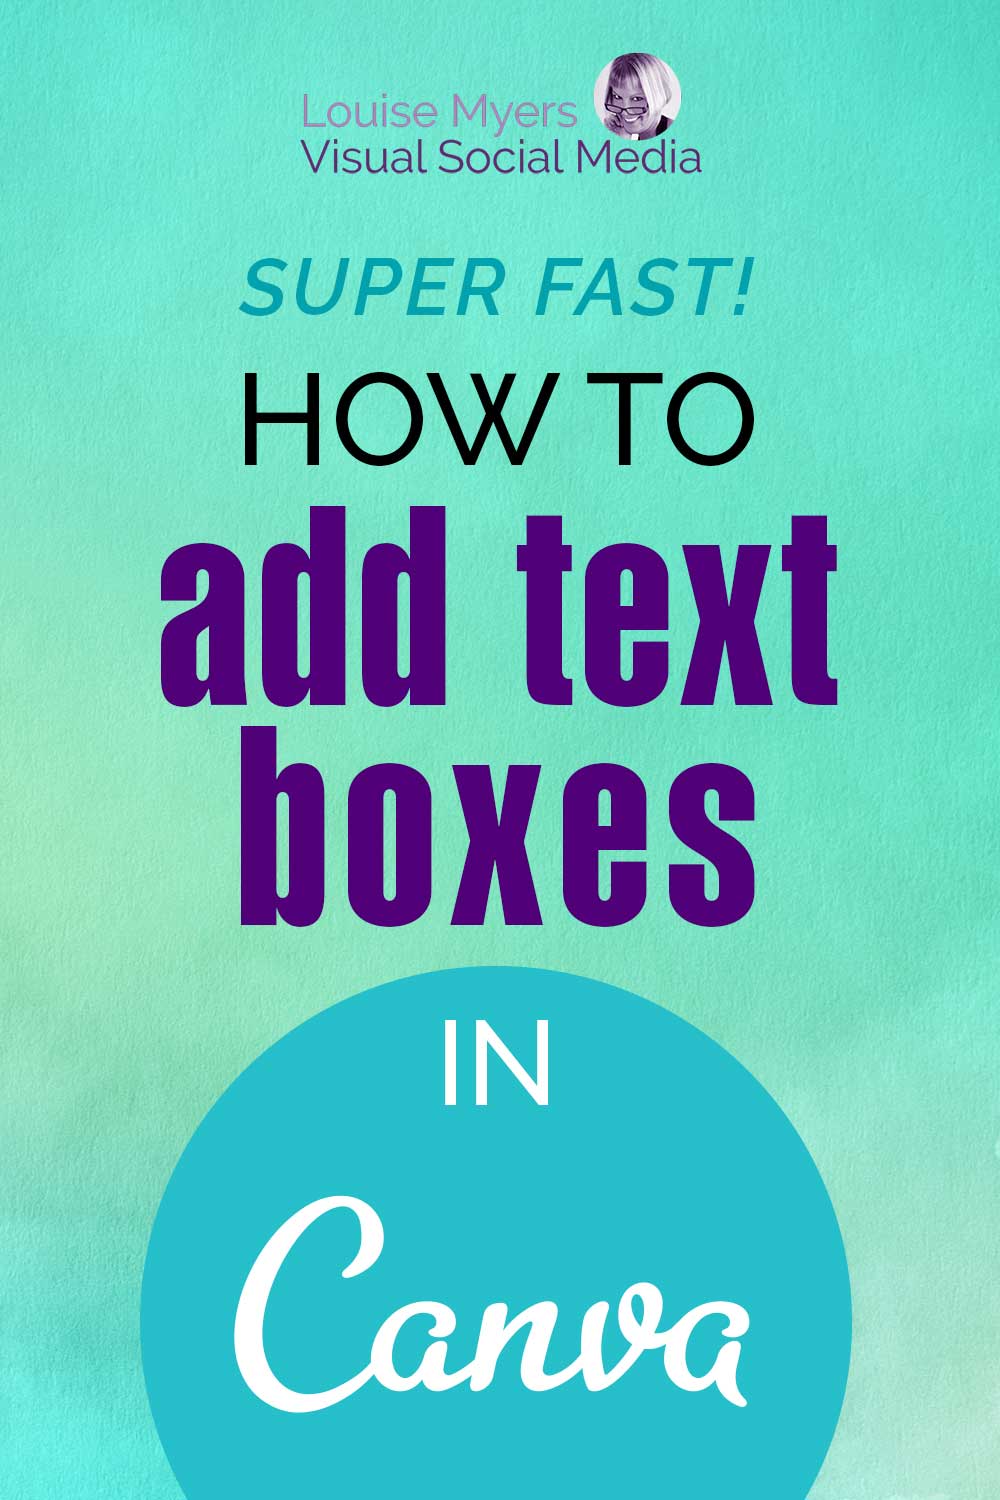 pinnable image saying how to add text boxes in canva super fast on aqua watercolor background.